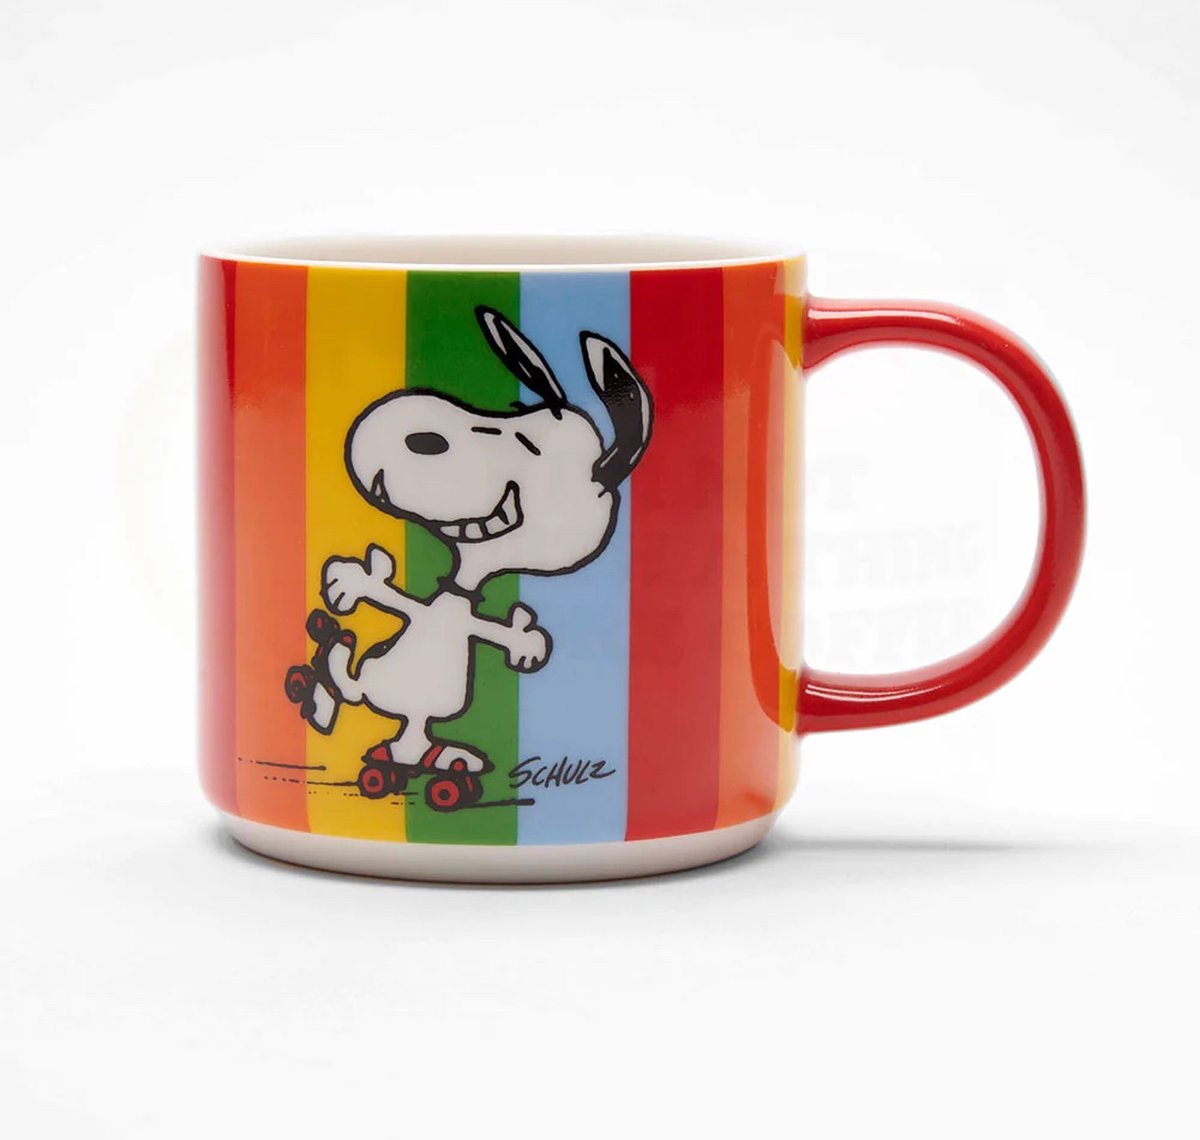 Magpie x Peanuts: Snoopy Mok - Let The Good Times Roll - Theemok - Cadeau Idee